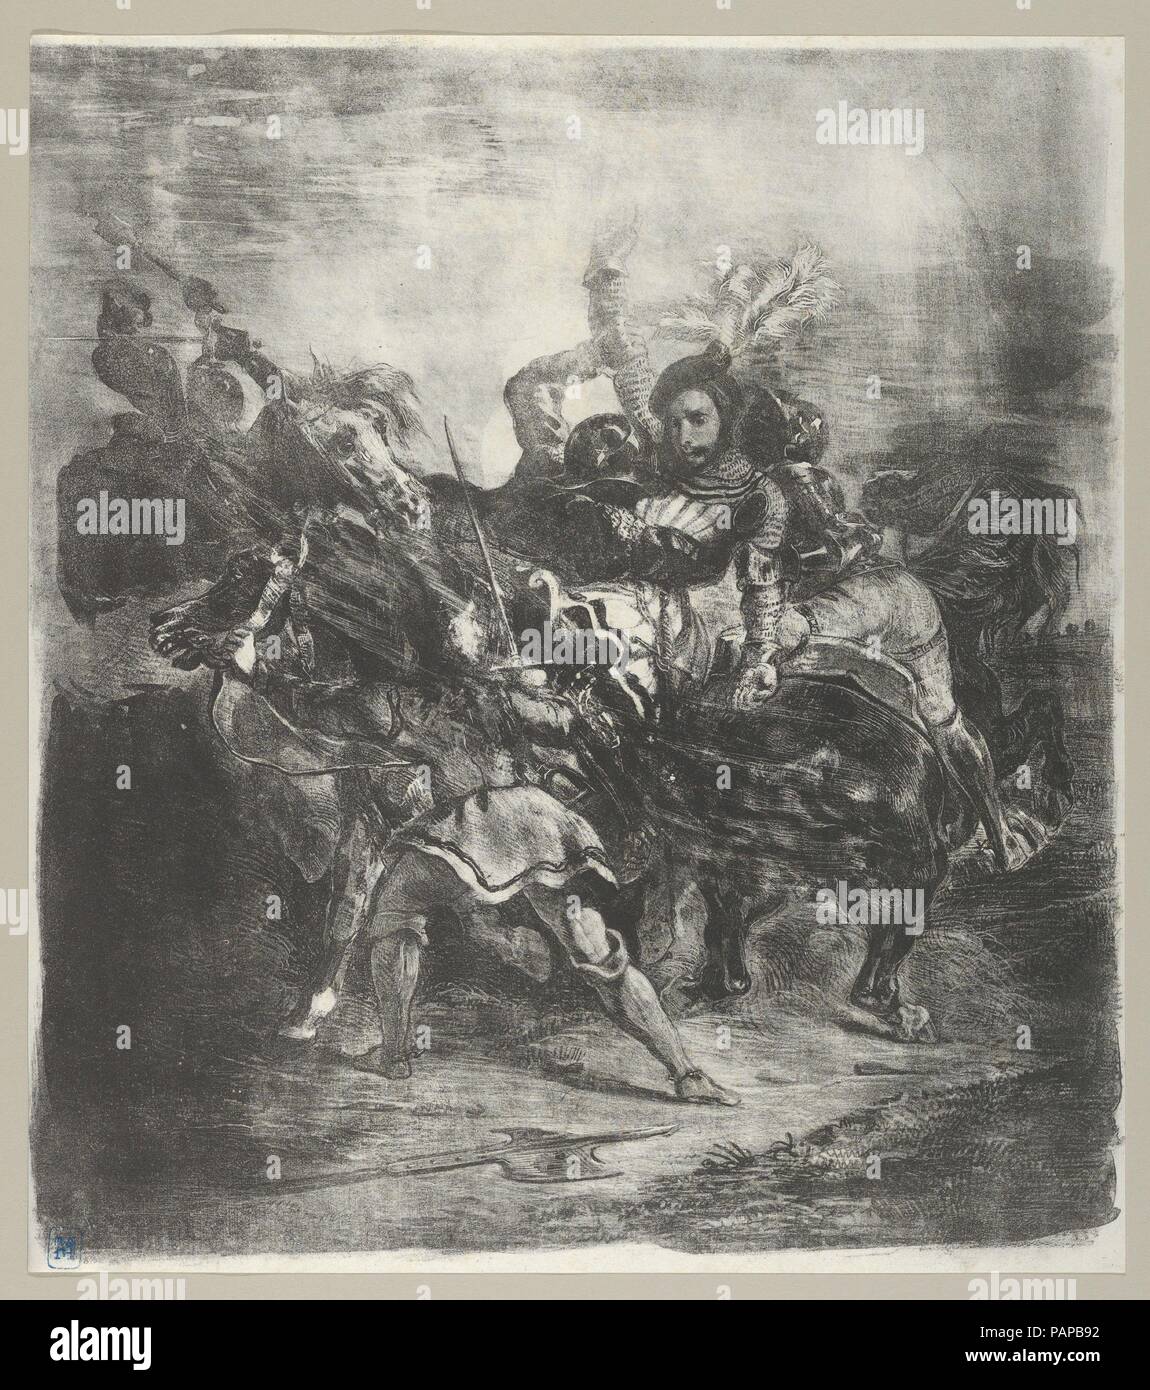 Weislingen attacked by Goetz's Men. Artist: Eugène Delacroix (French, Charenton-Saint-Maurice 1798-1863 Paris). Dimensions: 12 1/4 x 10 11/16 in. (31.1 x 27.2 cm). Series/Portfolio: Goethe, Goetz von Berlichingen, Act 1, Scene 3. Date: 1836-43.  The subject for this print is based on a scene in Goethe's play (published in German in 1773; and French in 1823) that tells the story of  the life of a German knight (1480-1562) who fought to regain the privileges of free knights, nullified by the emperor Maximilian I in 1495. Museum: Metropolitan Museum of Art, New York, USA. Stock Photo